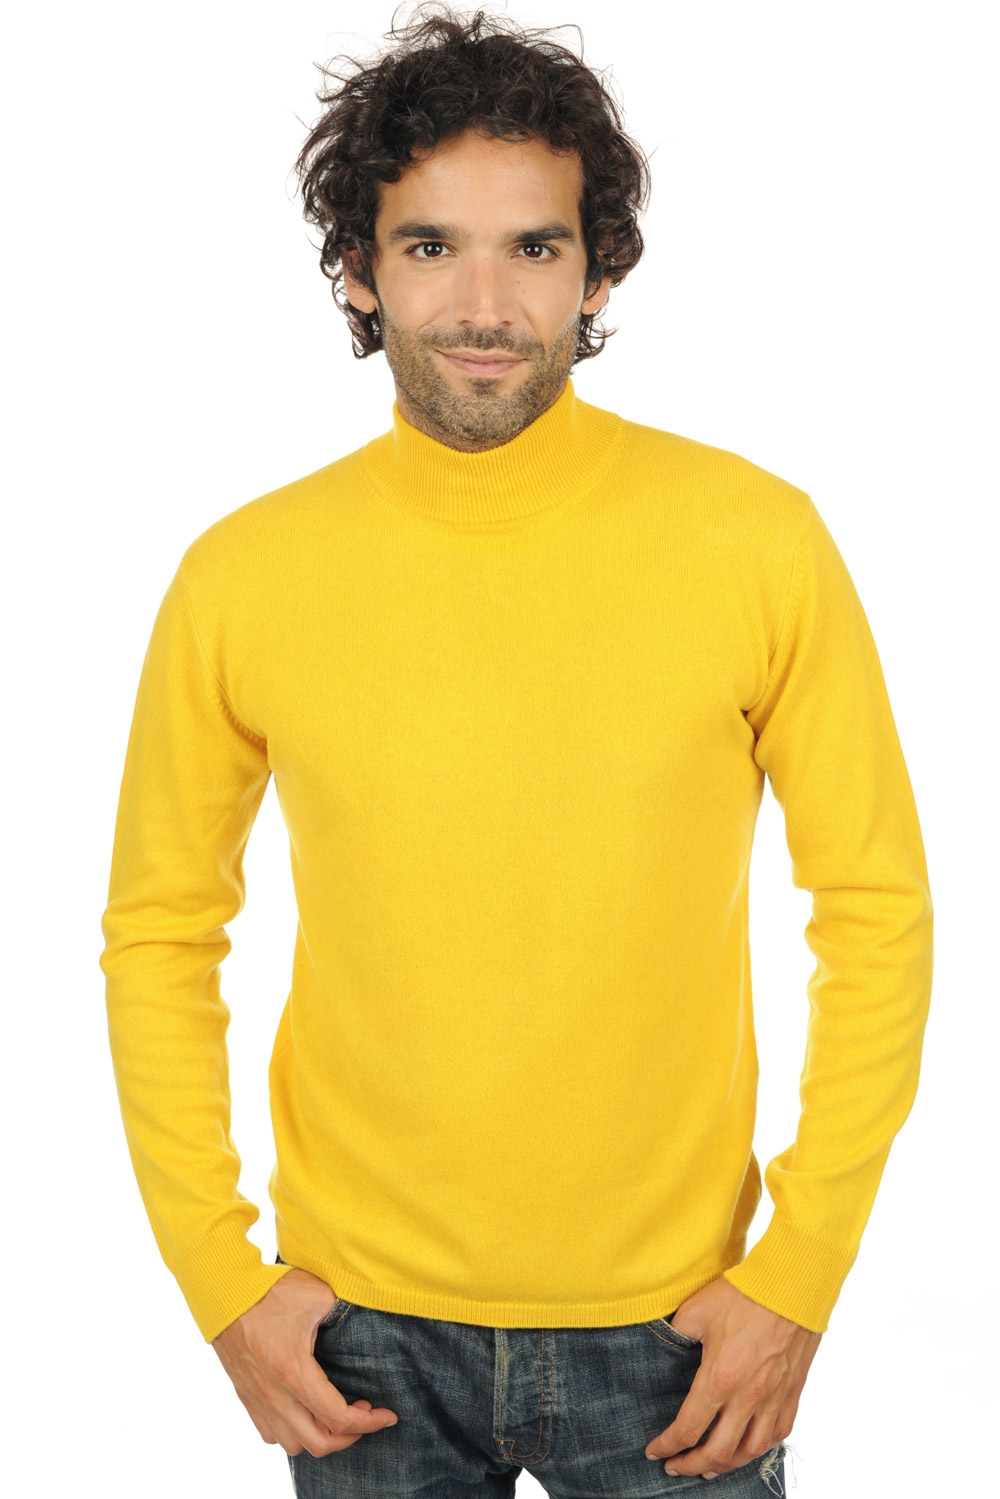 Cashmere men timeless classics frederic cyber yellow 3xl